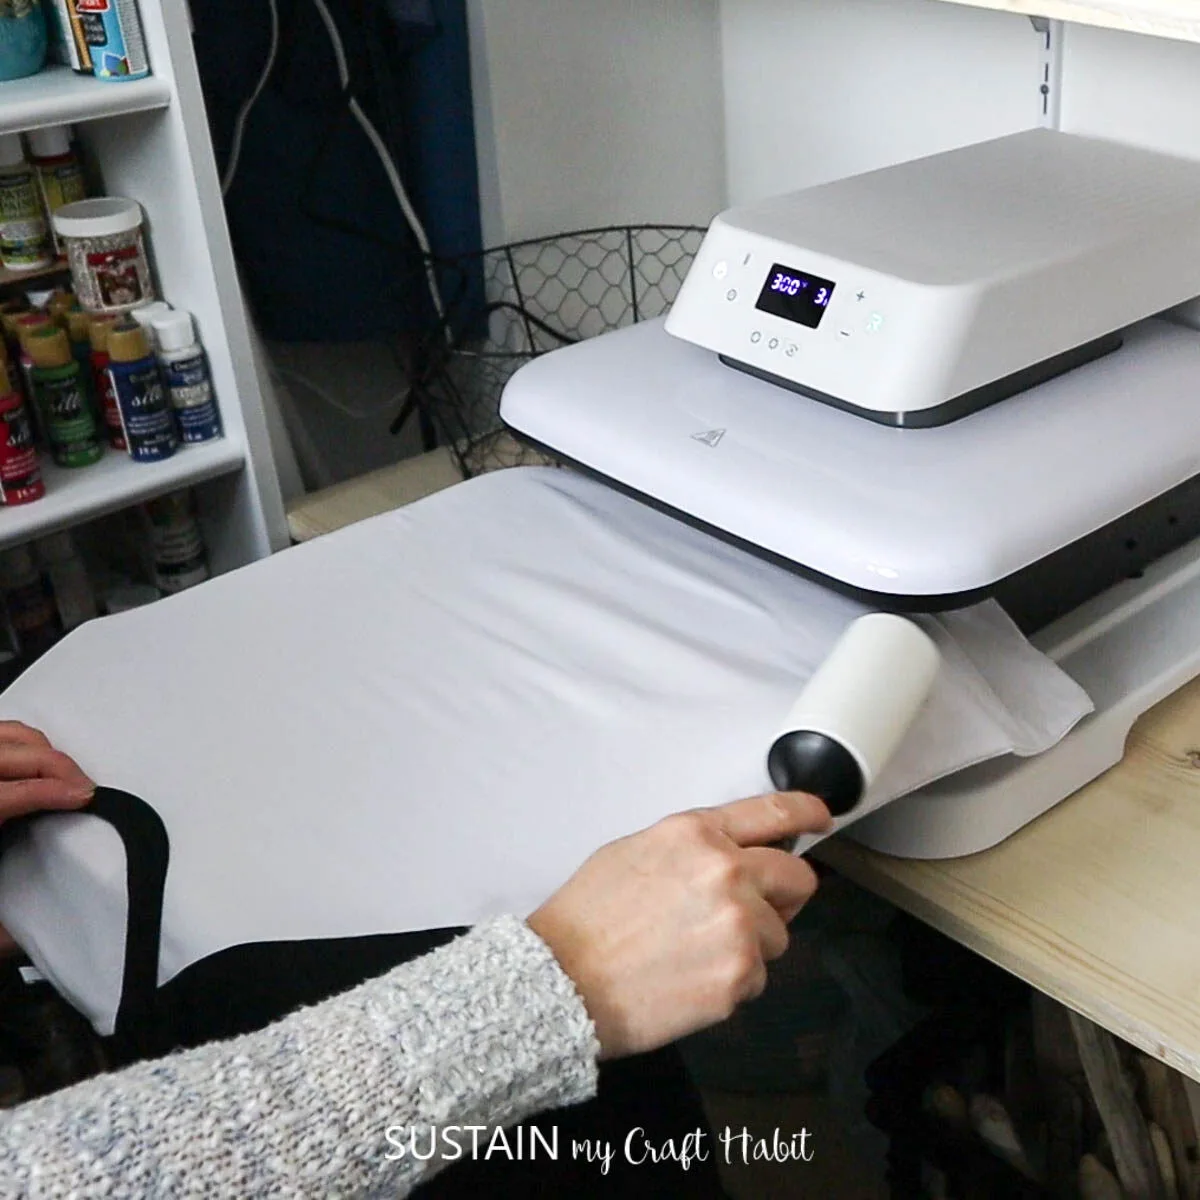 HTVRONT Auto Heat Press Review: Is It Worth the Investment? - The